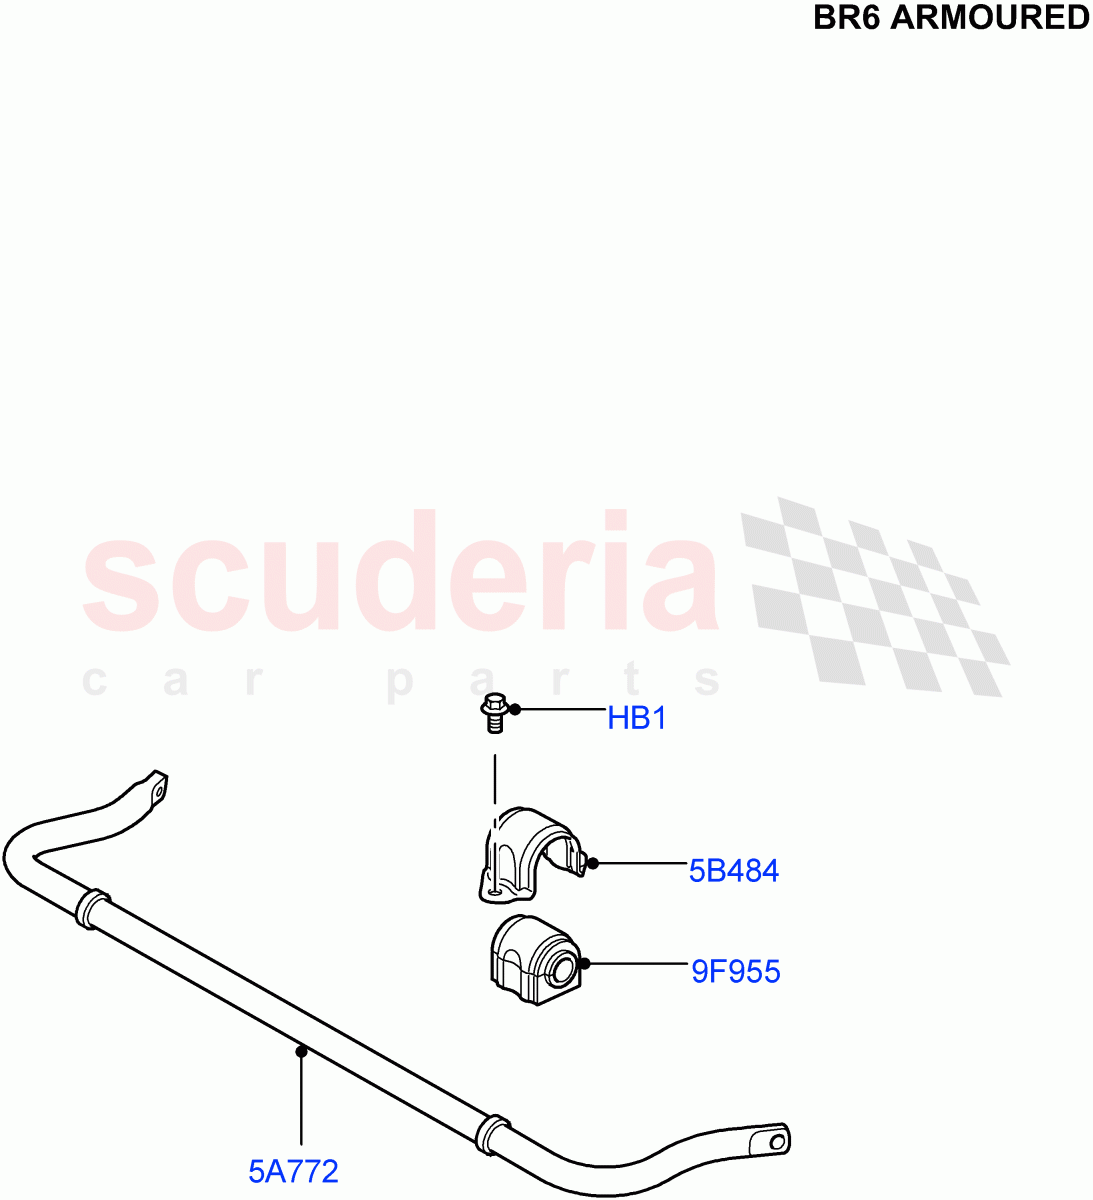 Rear Cross Member & Stabilizer Bar(With B6 Level Armouring)((V)FROMAA000001) of Land Rover Land Rover Discovery 4 (2010-2016) [5.0 OHC SGDI NA V8 Petrol]